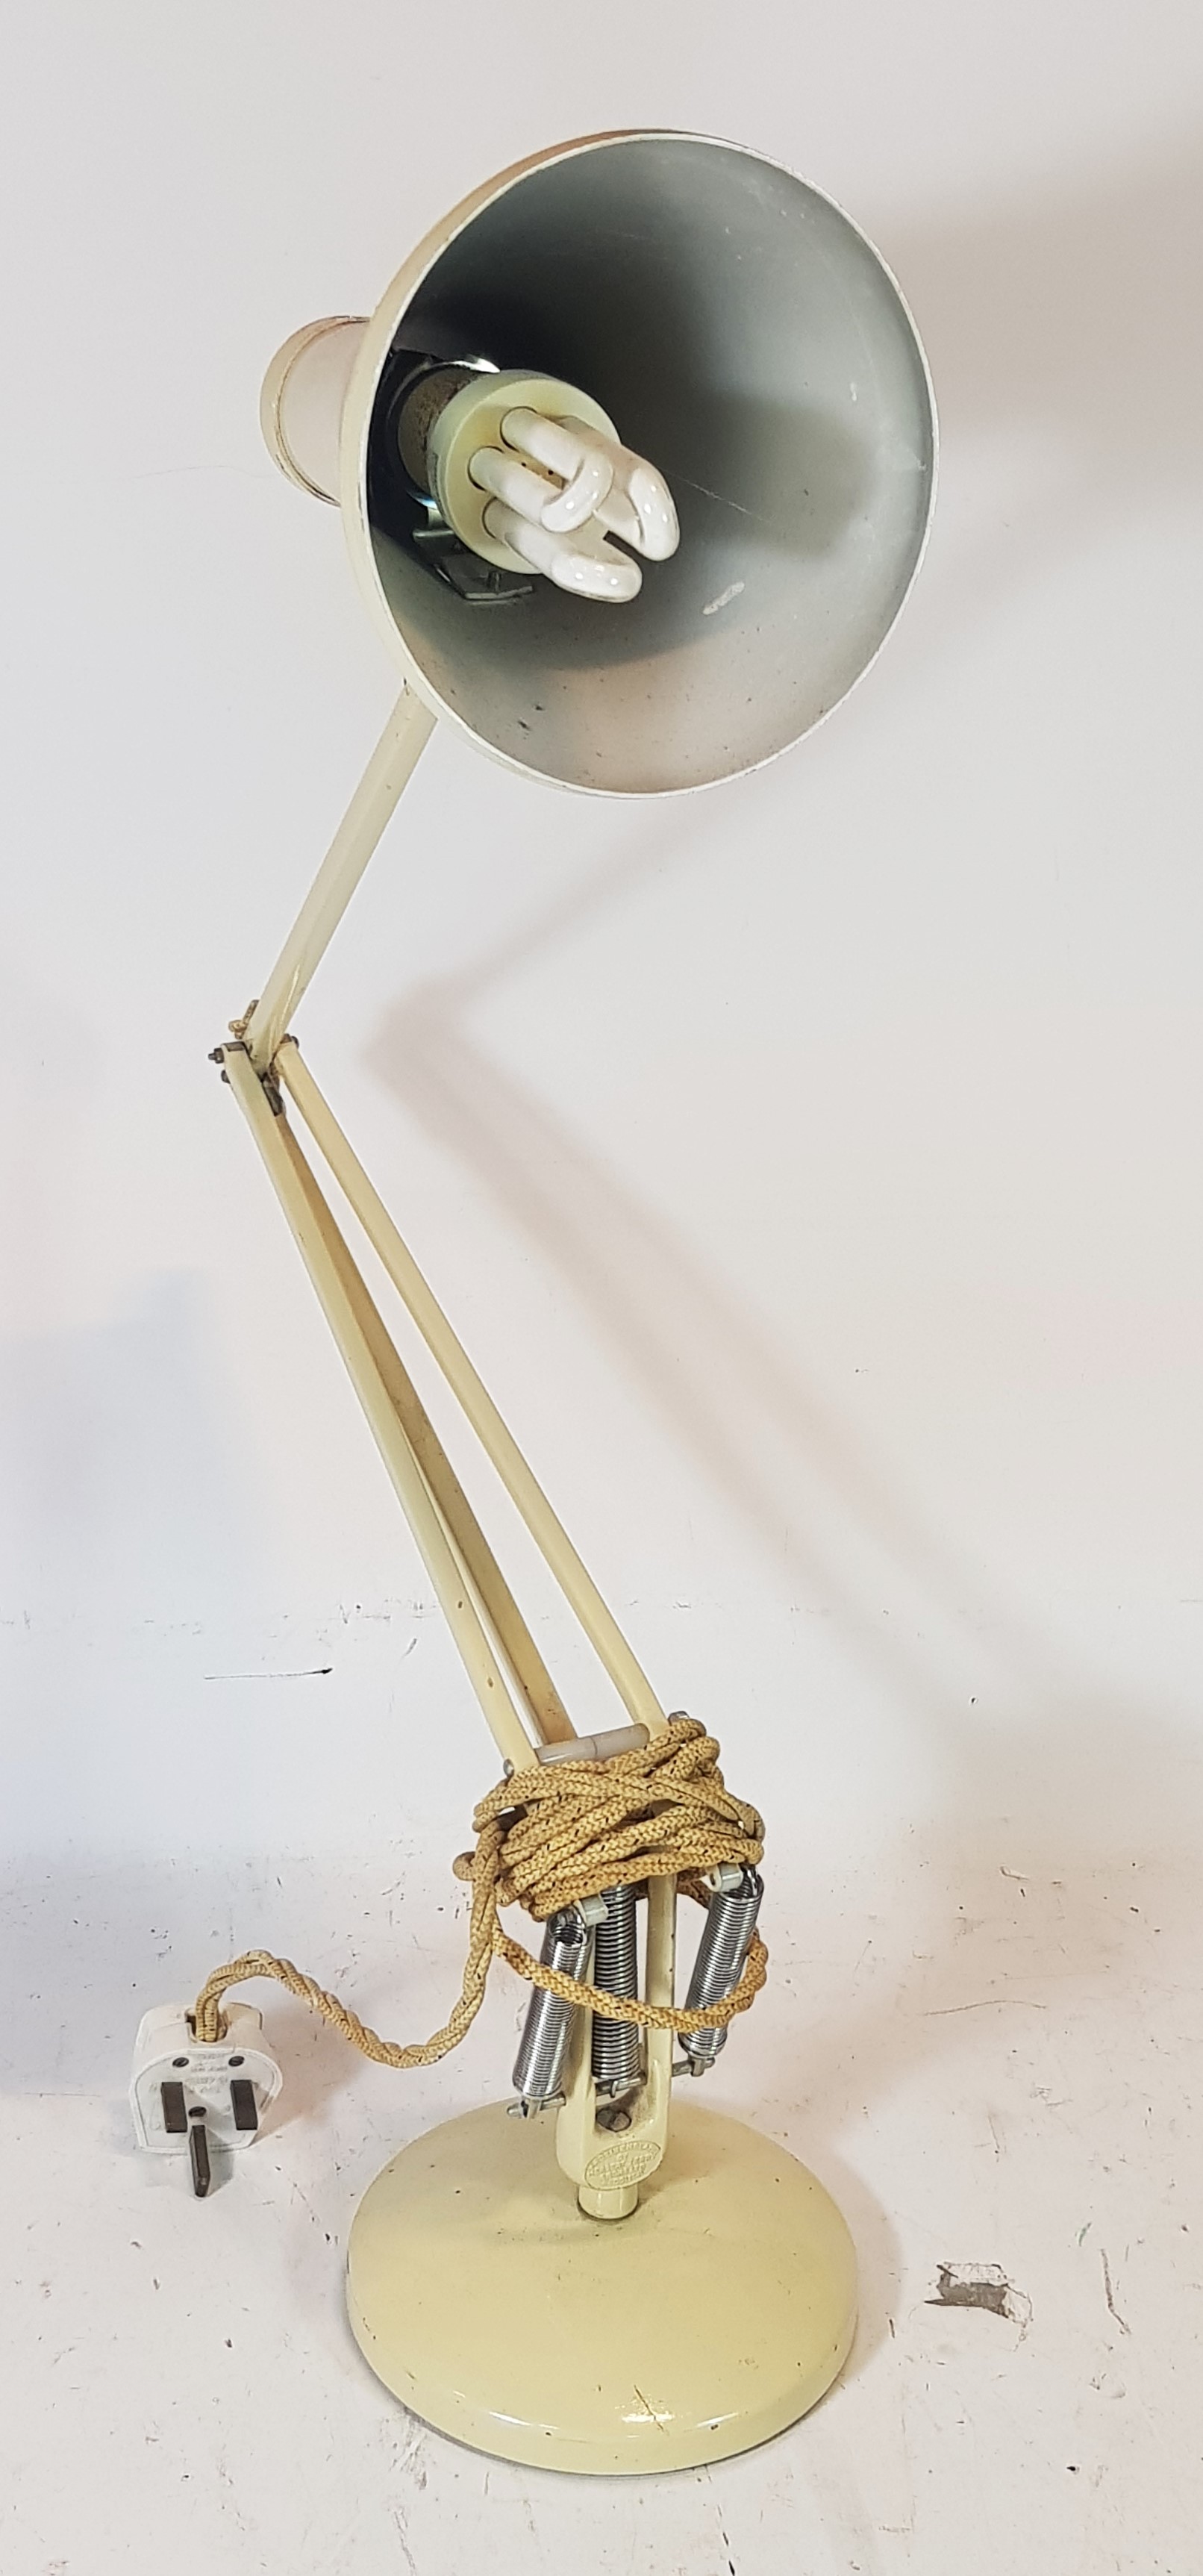 An early 20th century anglepoise lamp, made in England by Herbert Terry & Sons of Redditch. H53cm.